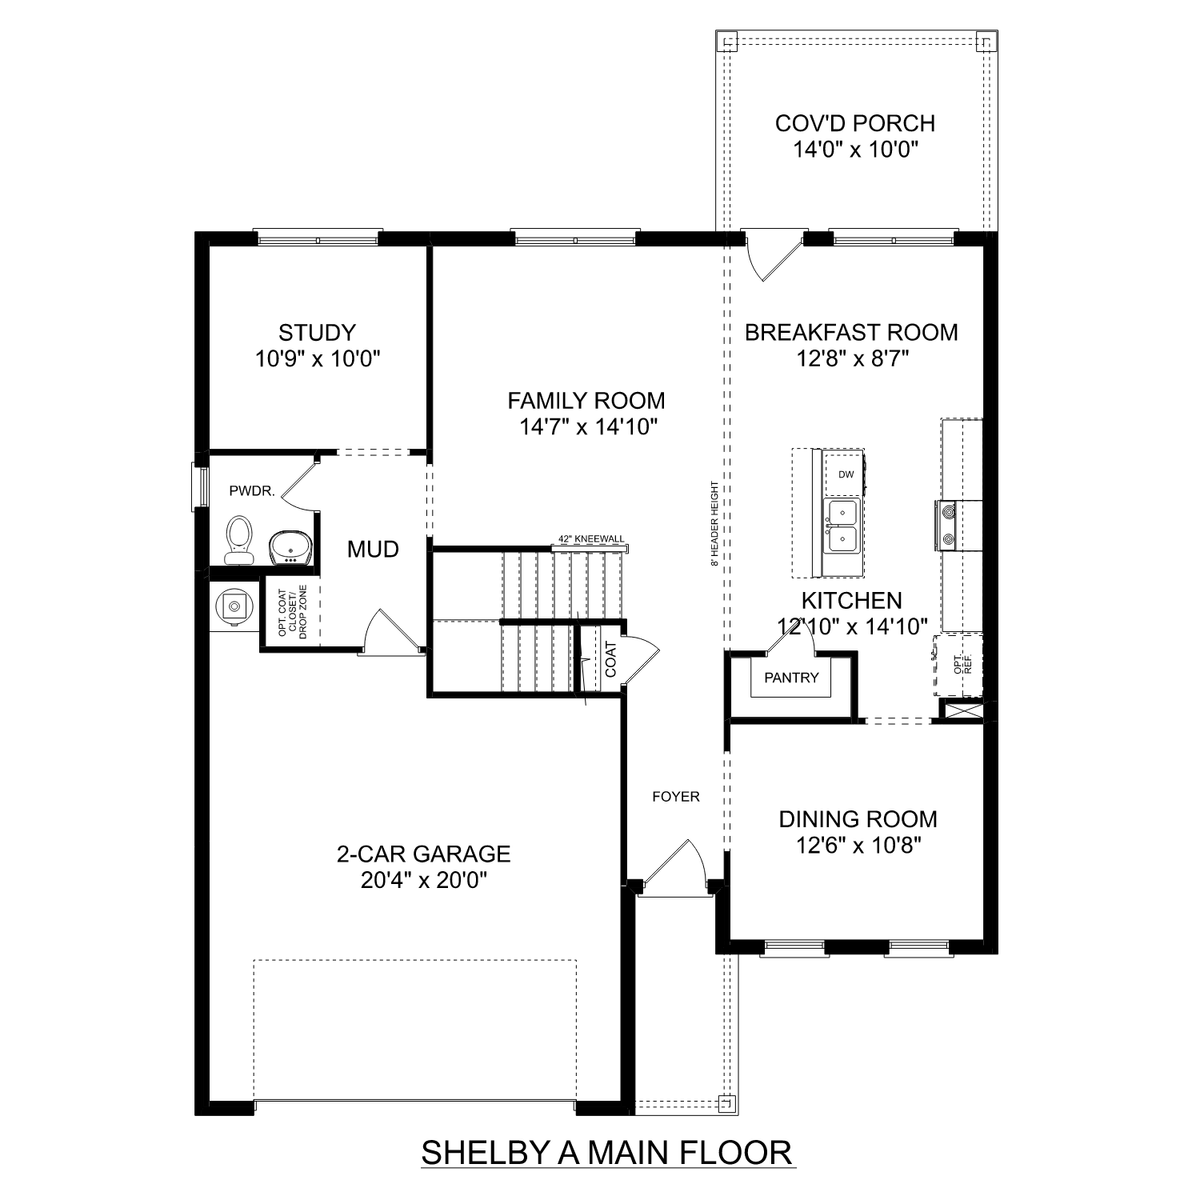 1 - The Shelby A floor plan layout for 2148 Mcafee Road in Davidson Homes' The Reserve at North Ridge community.